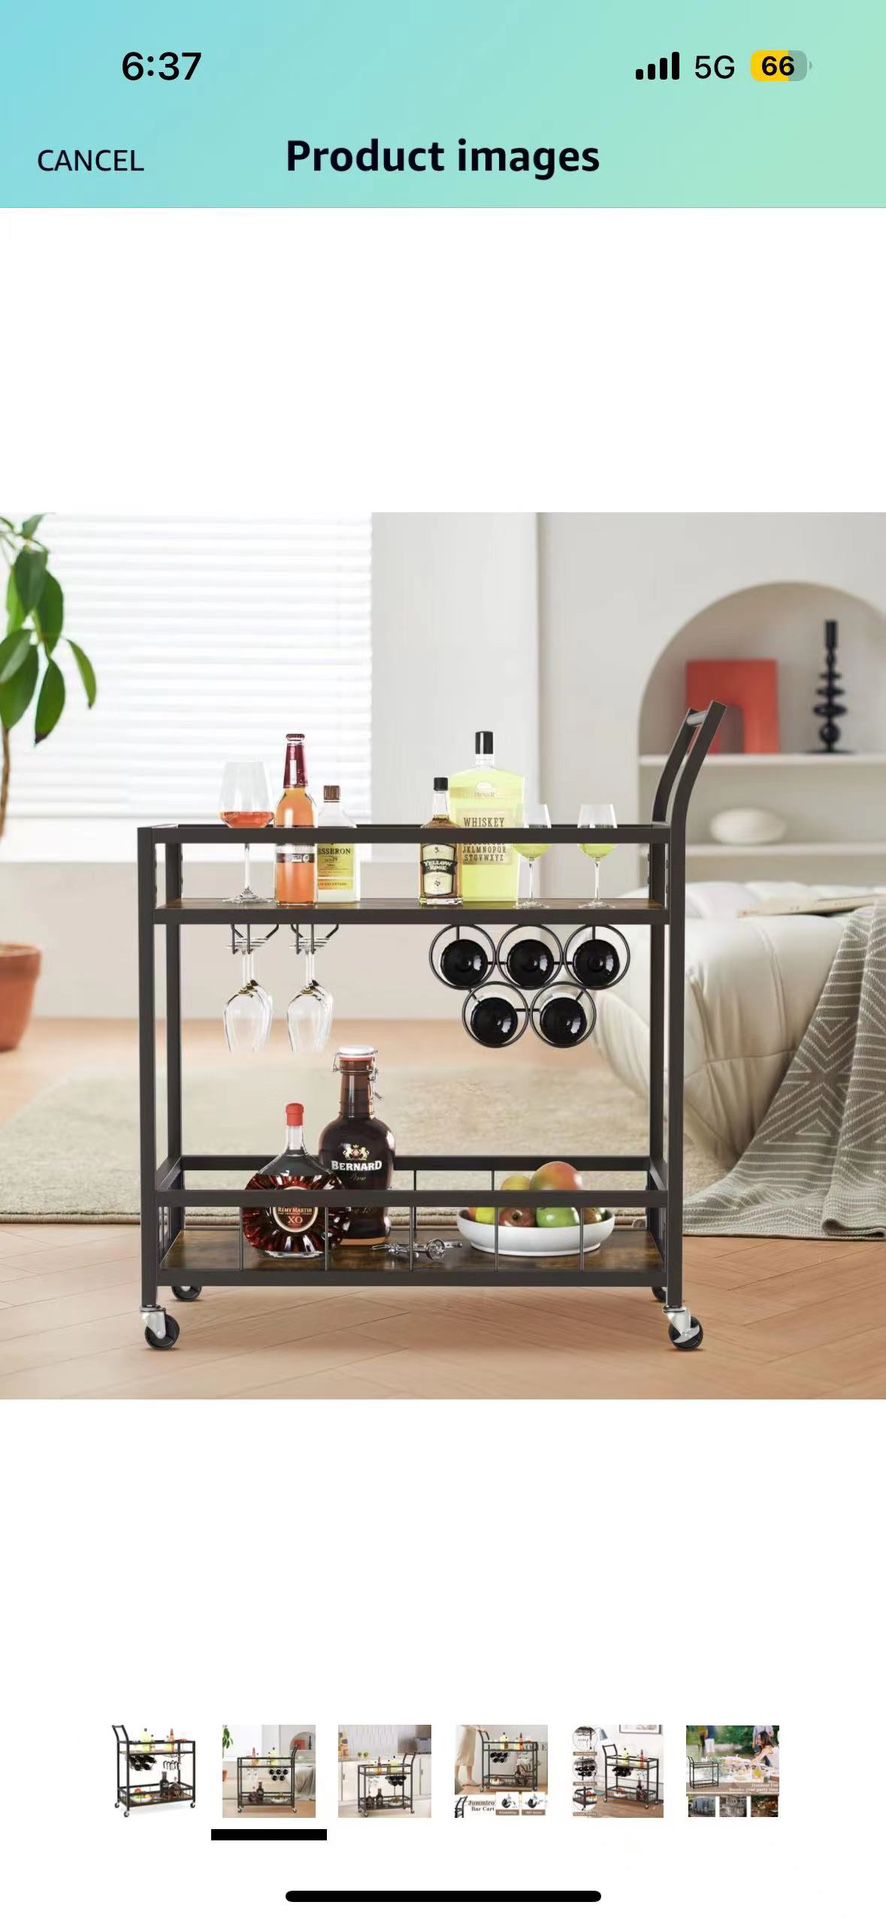 Bar Cart Industrial Home Mobile Wine Cart Serving Bar Cart on Wheels with Storage Shelves Wine Rack and Glass Holder for Living Room, Kitchen, Corrido